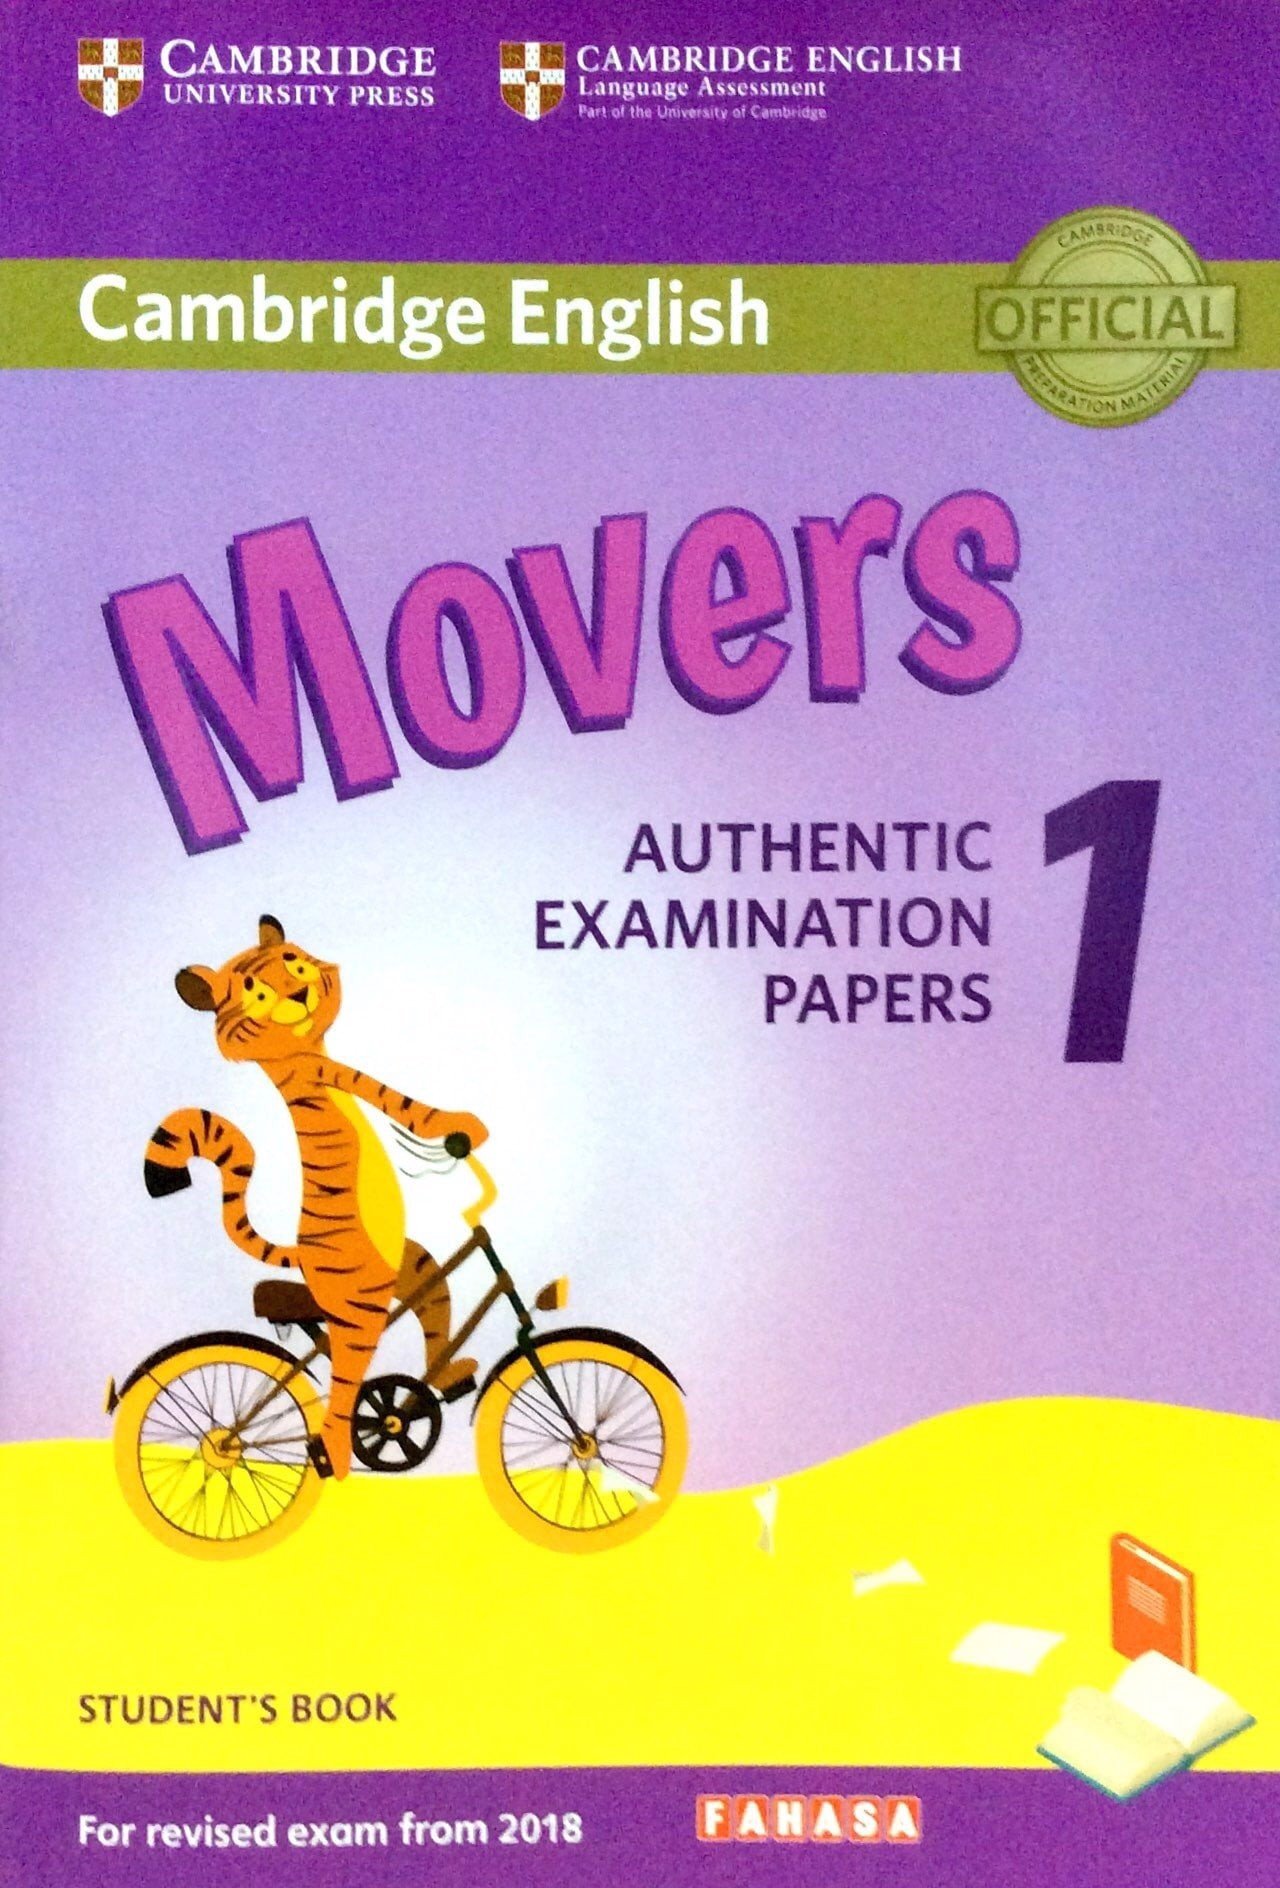 Cambridge English - Movers Authentic Examination Papers 1 - Student's Book